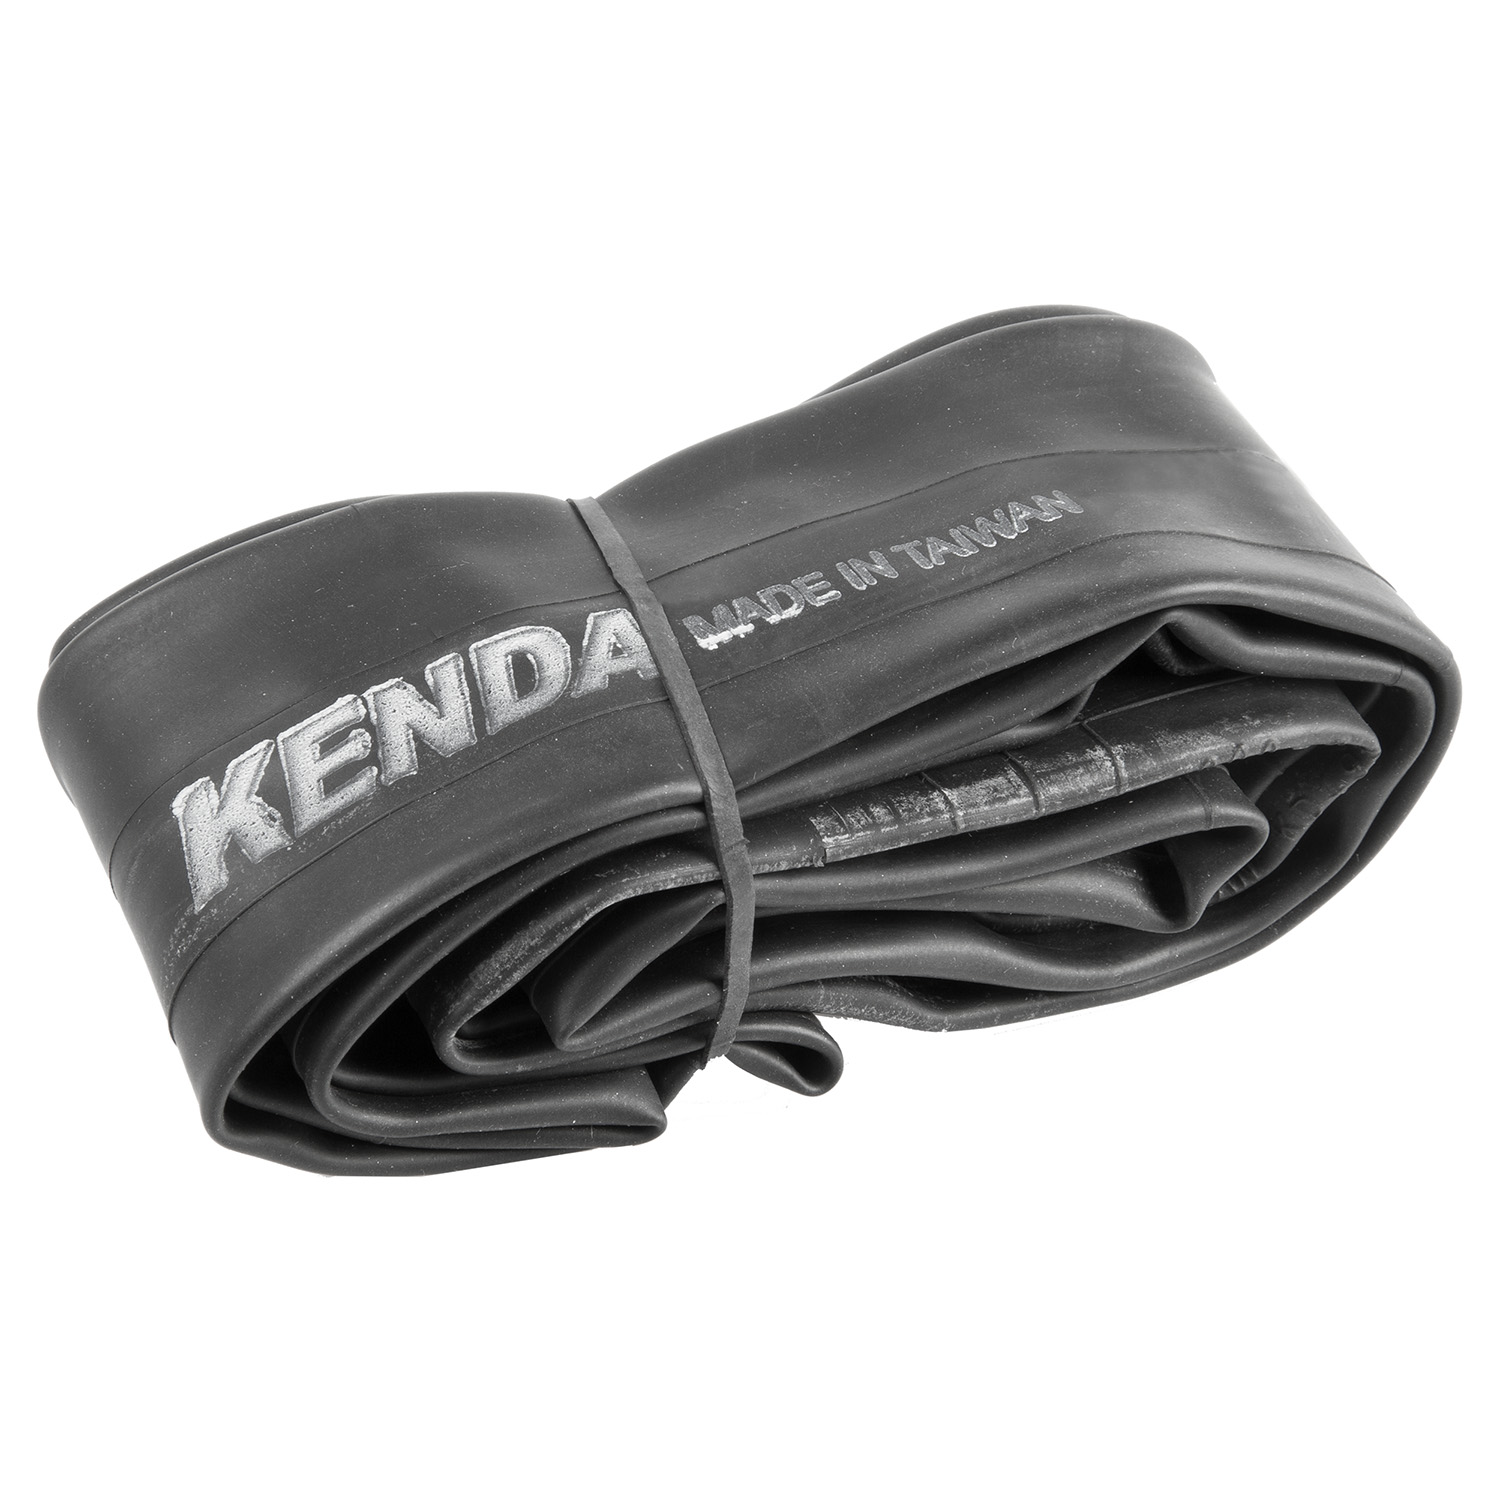 512219 KENDA 700 x 28 – 45C bicycle tube – AVAILABLE IN SELECTED BIKE SHOPS